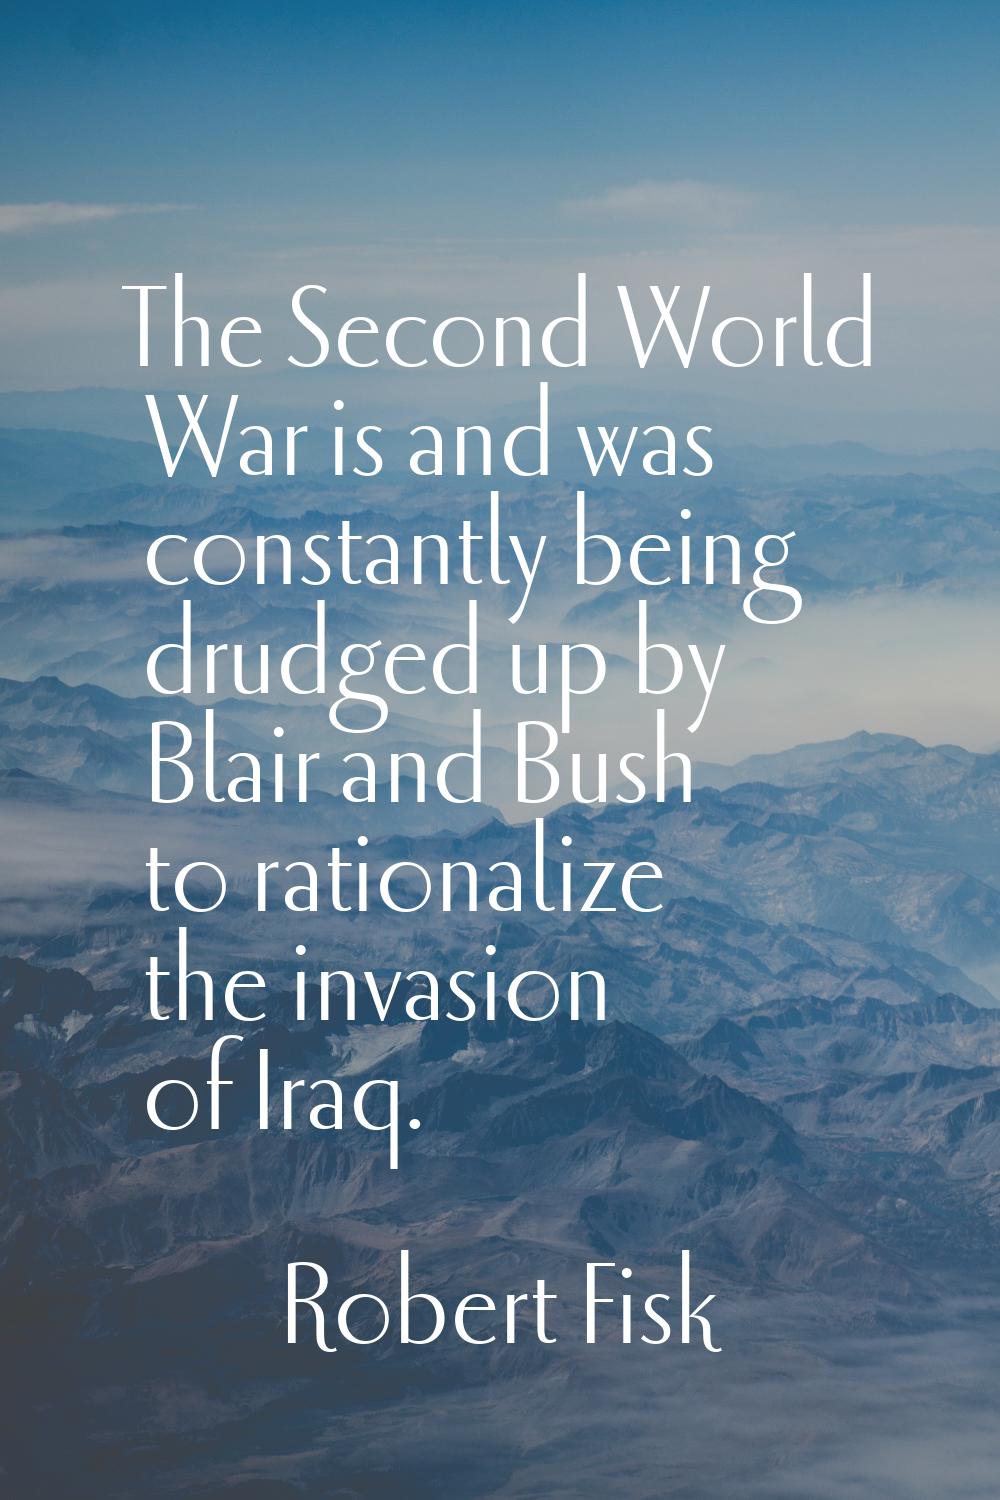 The Second World War is and was constantly being drudged up by Blair and Bush to rationalize the in